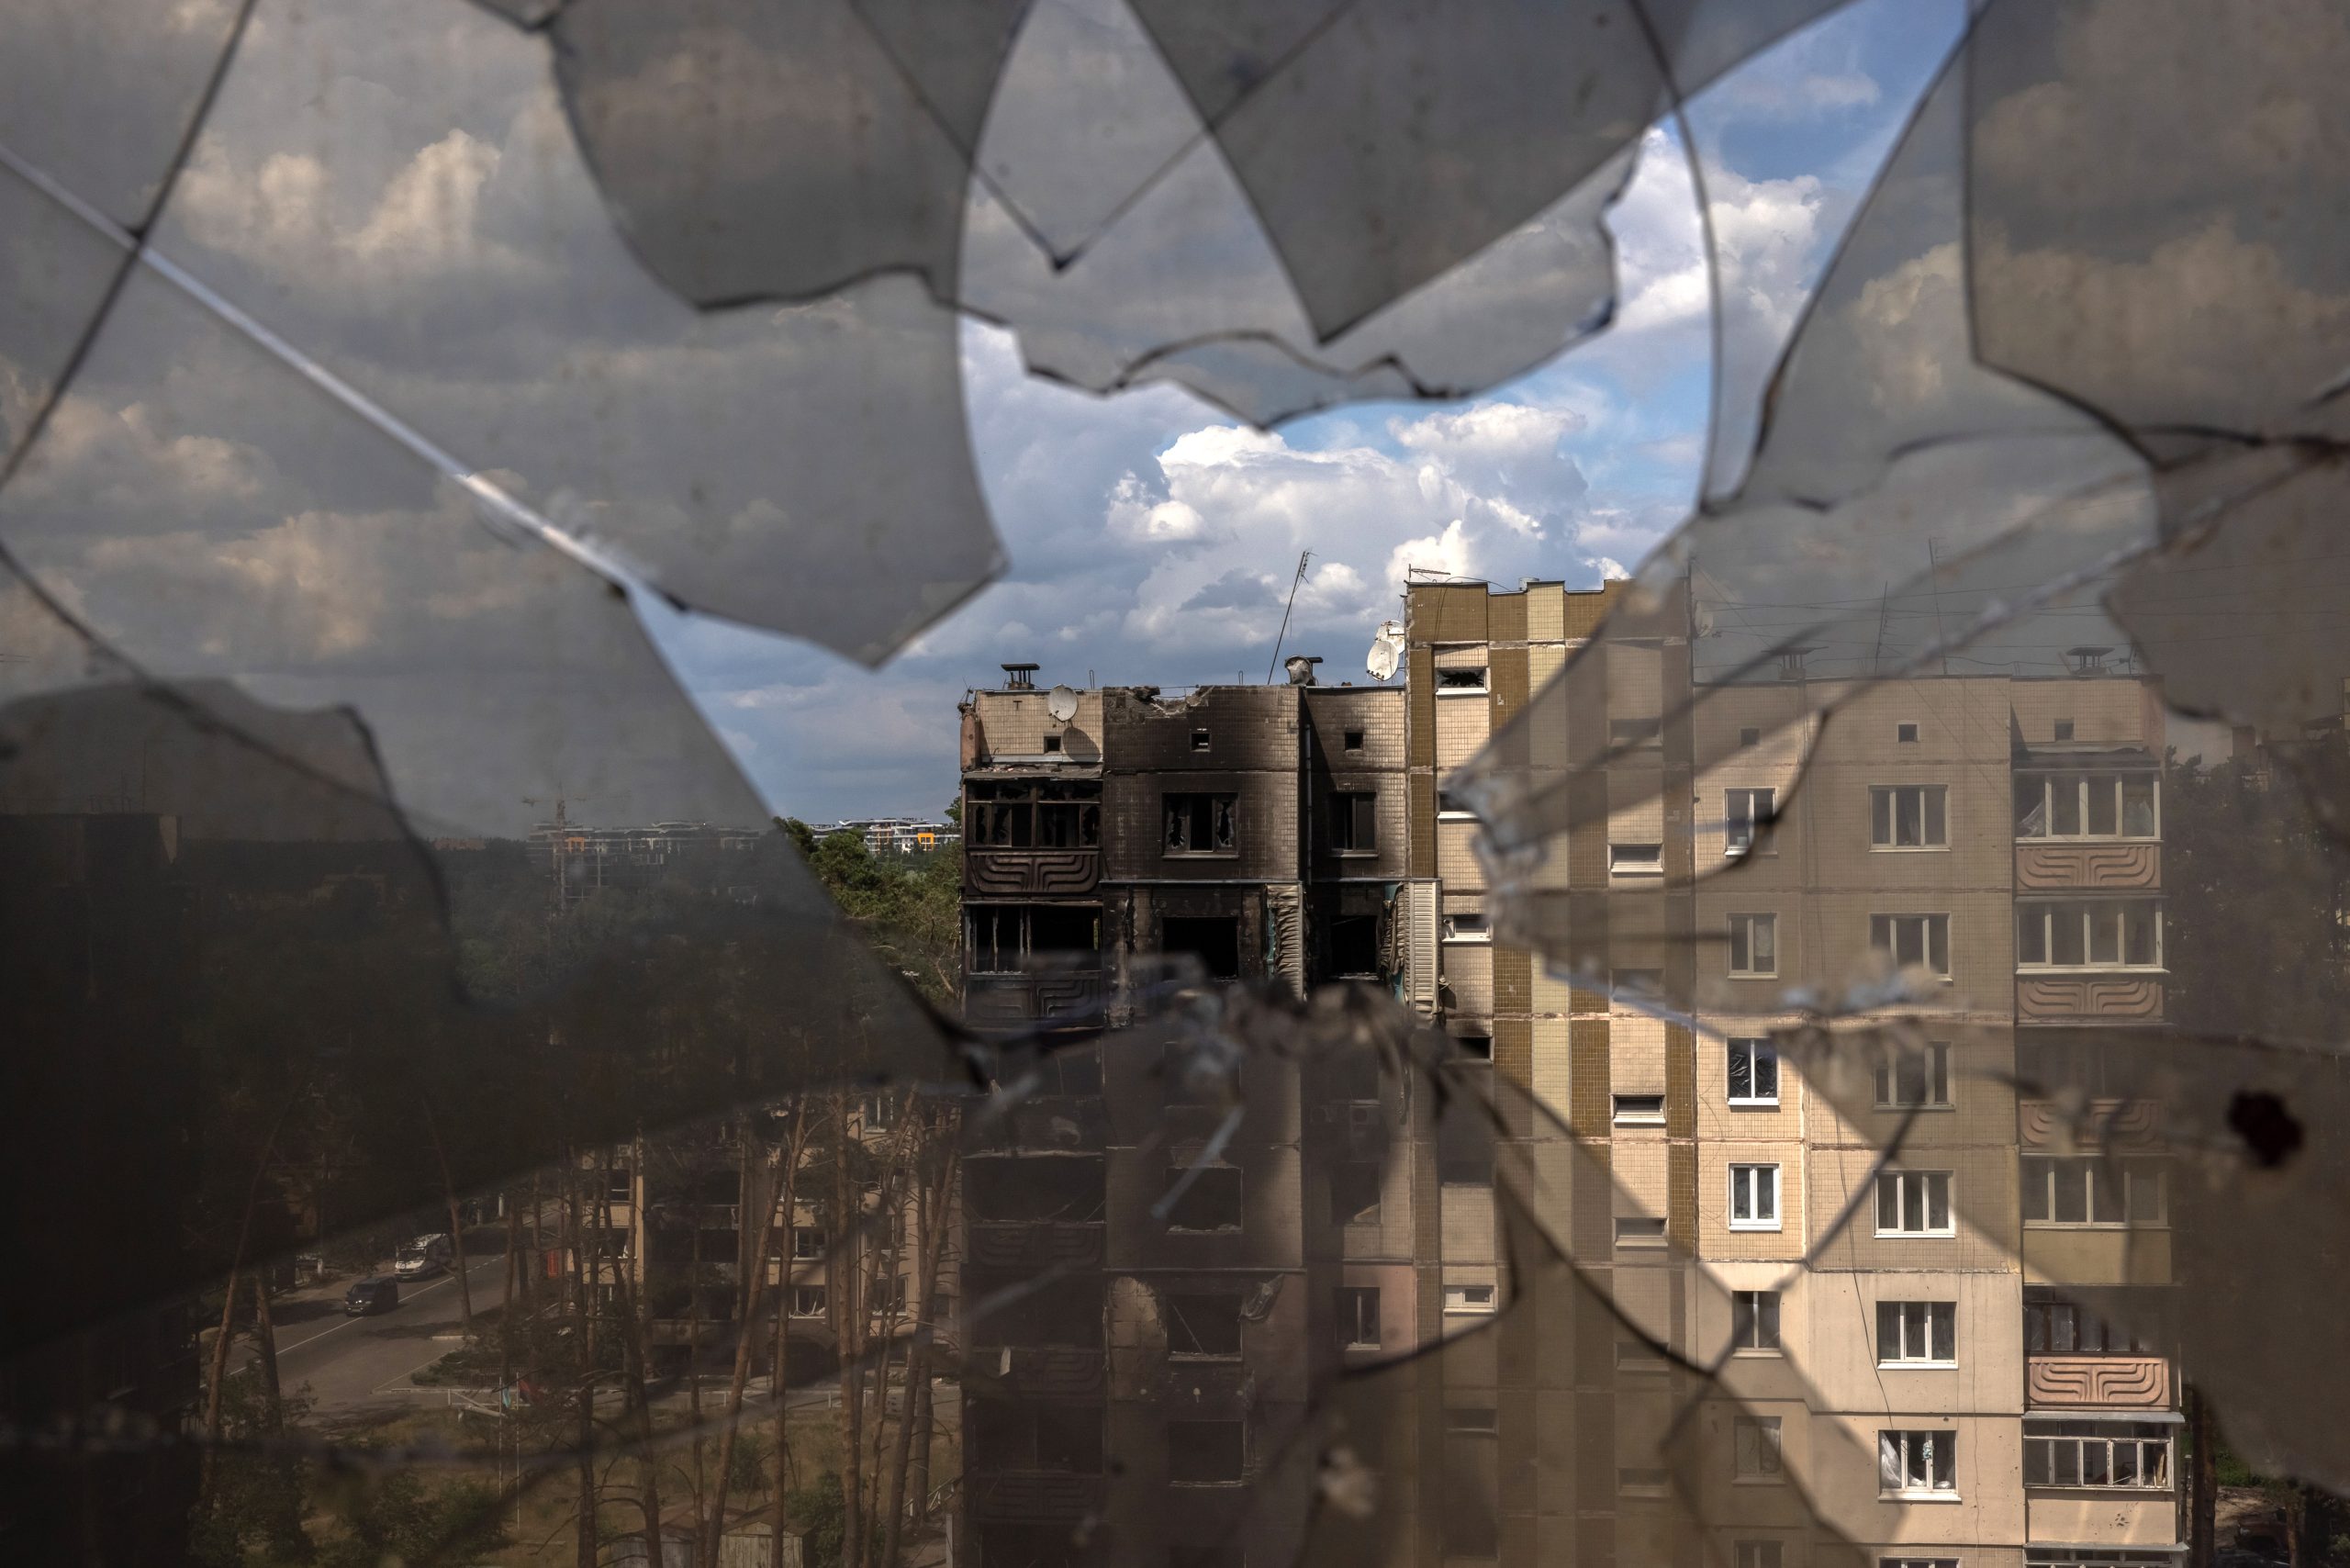 epa10016585 A look through broken window glass shows residential buildings damaged during Russian attacks in Irpin, Ukraine, 16 June 2022. The Ukrainian town of Irpin near Kyiv (Kiev), became a battlefield site when the Russian army attacked the Kyiv region in an attempt to reach Ukraine’s capital. Irpin was heavily shelled, causing death and destruction. At the end of March, when the town was taken back by the Ukrainian army, the mayor of Irpin announced that around 300 civilians and 50 Ukrainian servicemen were killed in Irpin during the Russian attacks. On 24 February Russian troops had invaded Ukraine resulting in fighting, deaths and destruction and a humanitarian crisis in the country.  EPA/ROMAN PILIPEY